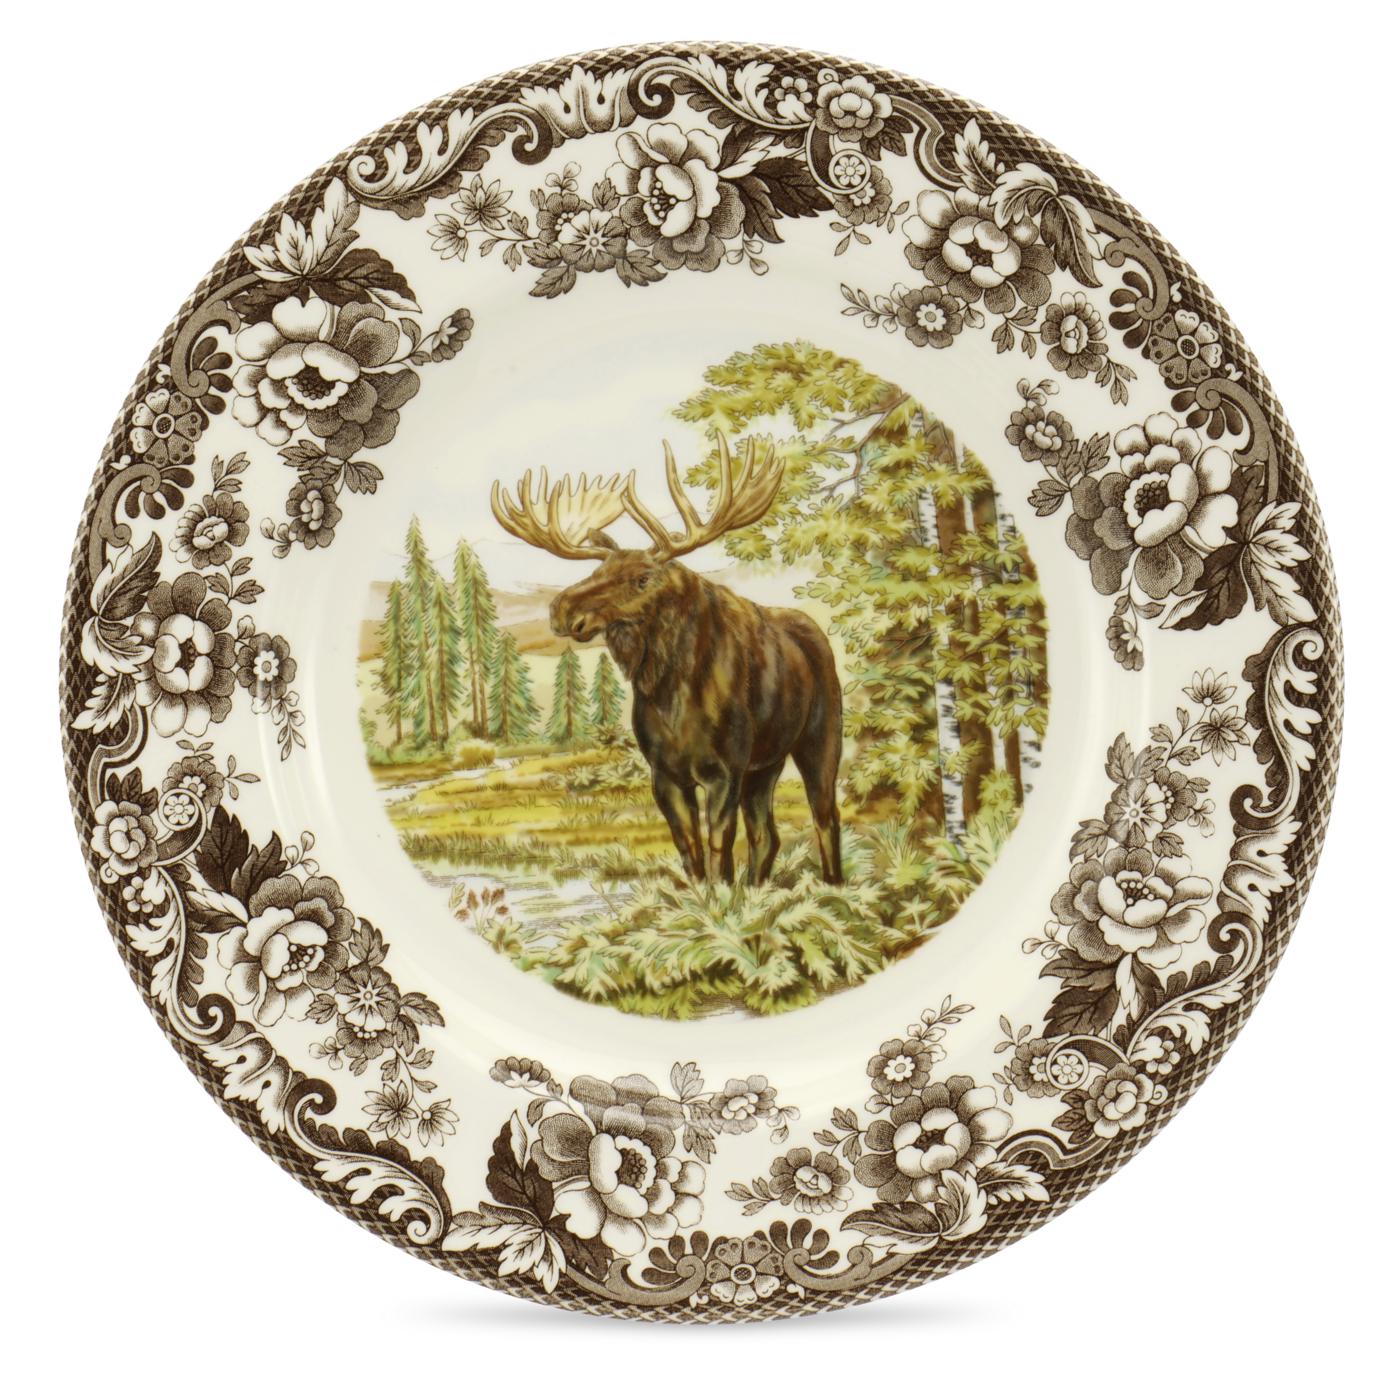 Woodland Dinner Plate 10.5 Inch, Moose image number null